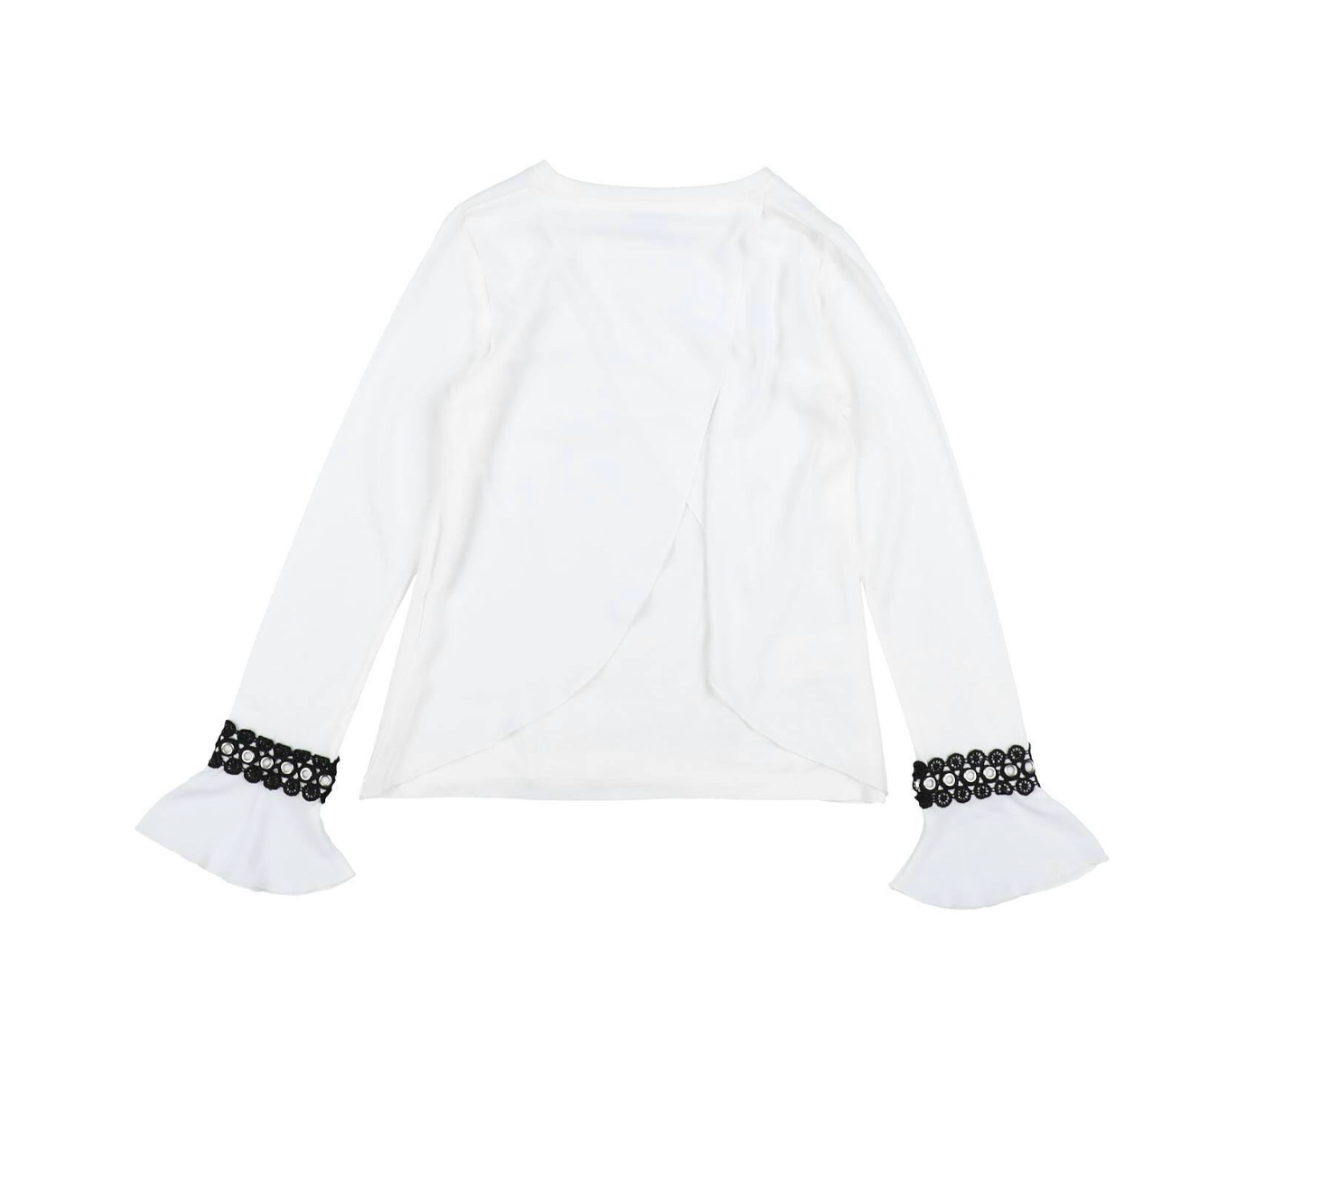 PINKO - White top - 8 years old